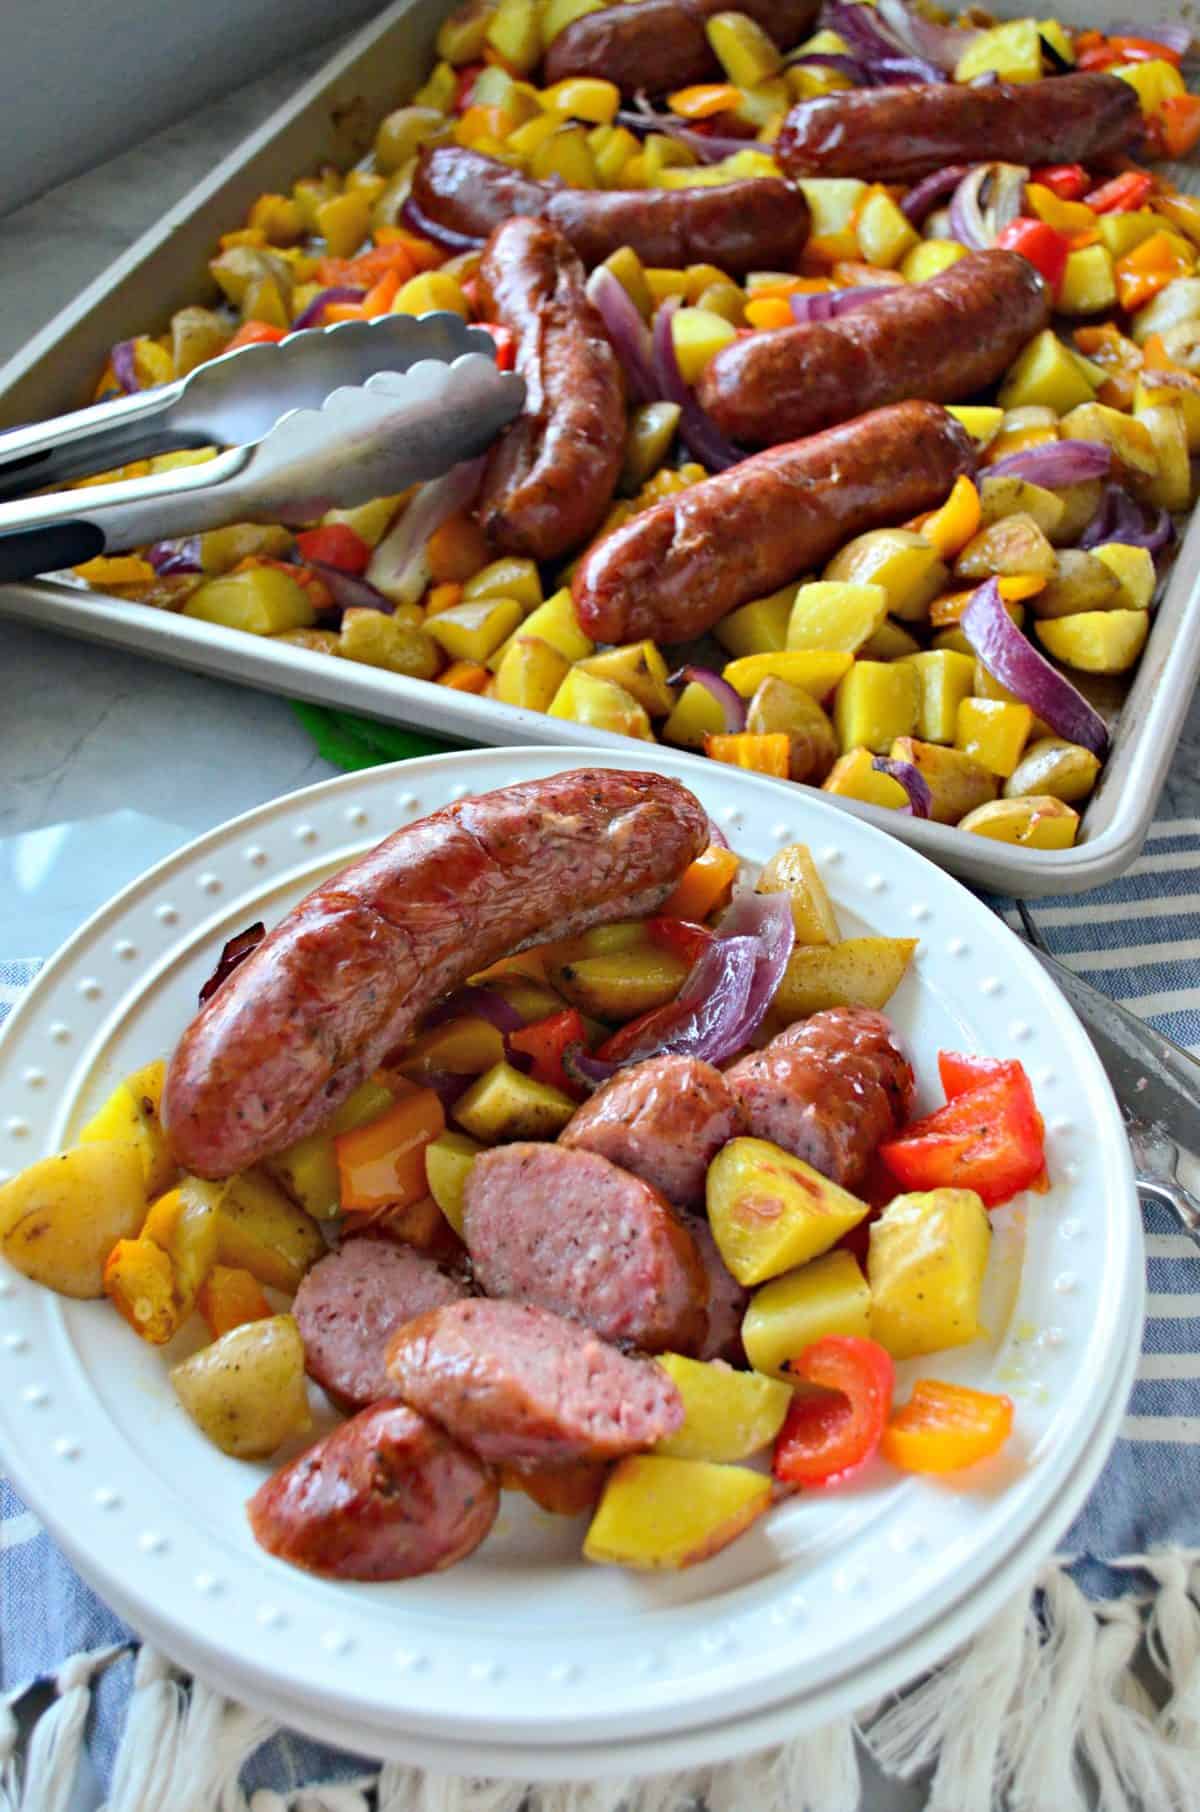 plated sliced browned Kielbasa sausage, diced Potato, and Peppers in front of sheet pan with leftovers.